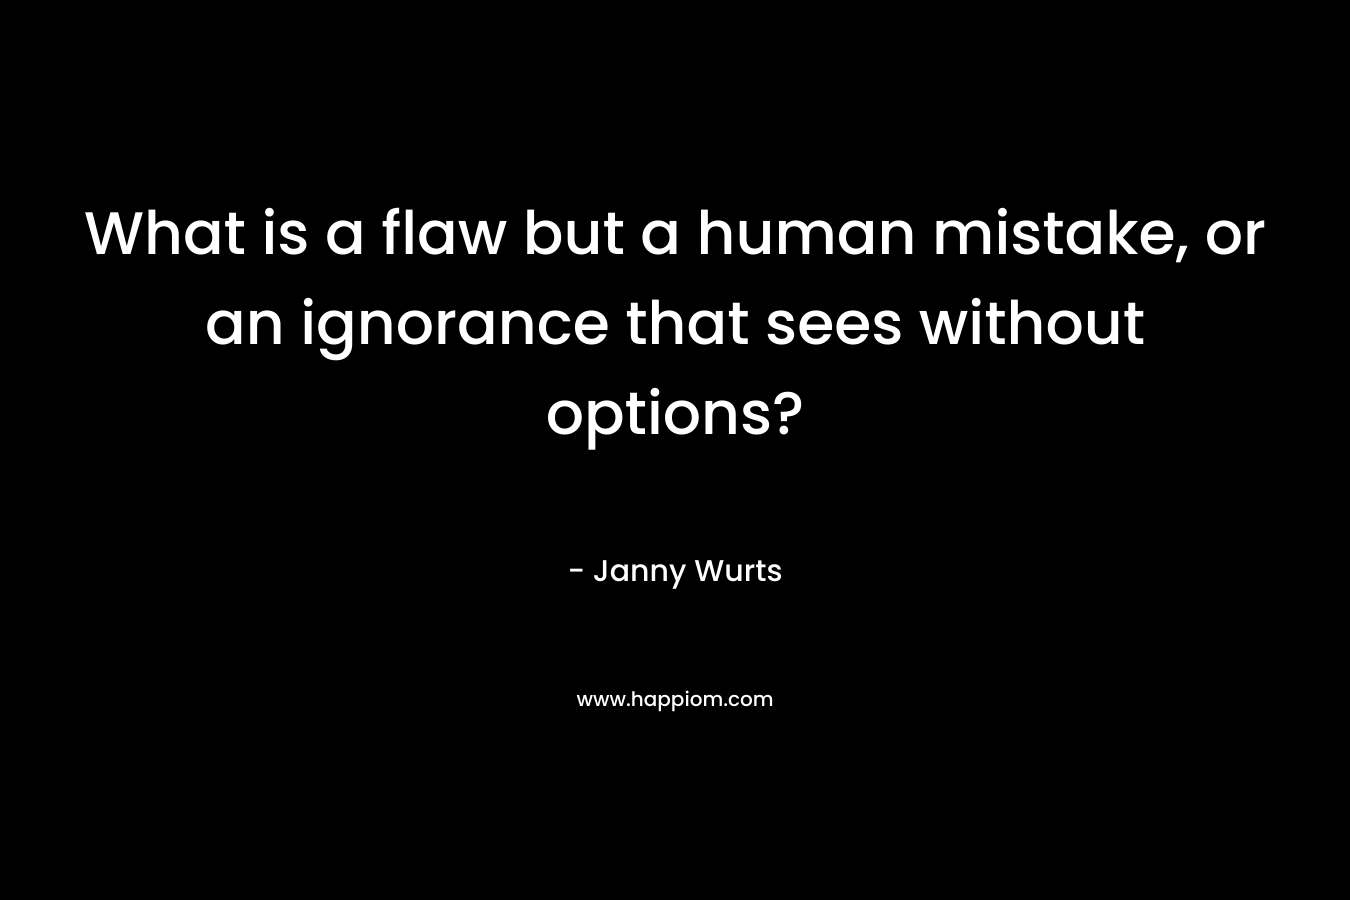 What is a flaw but a human mistake, or an ignorance that sees without options?